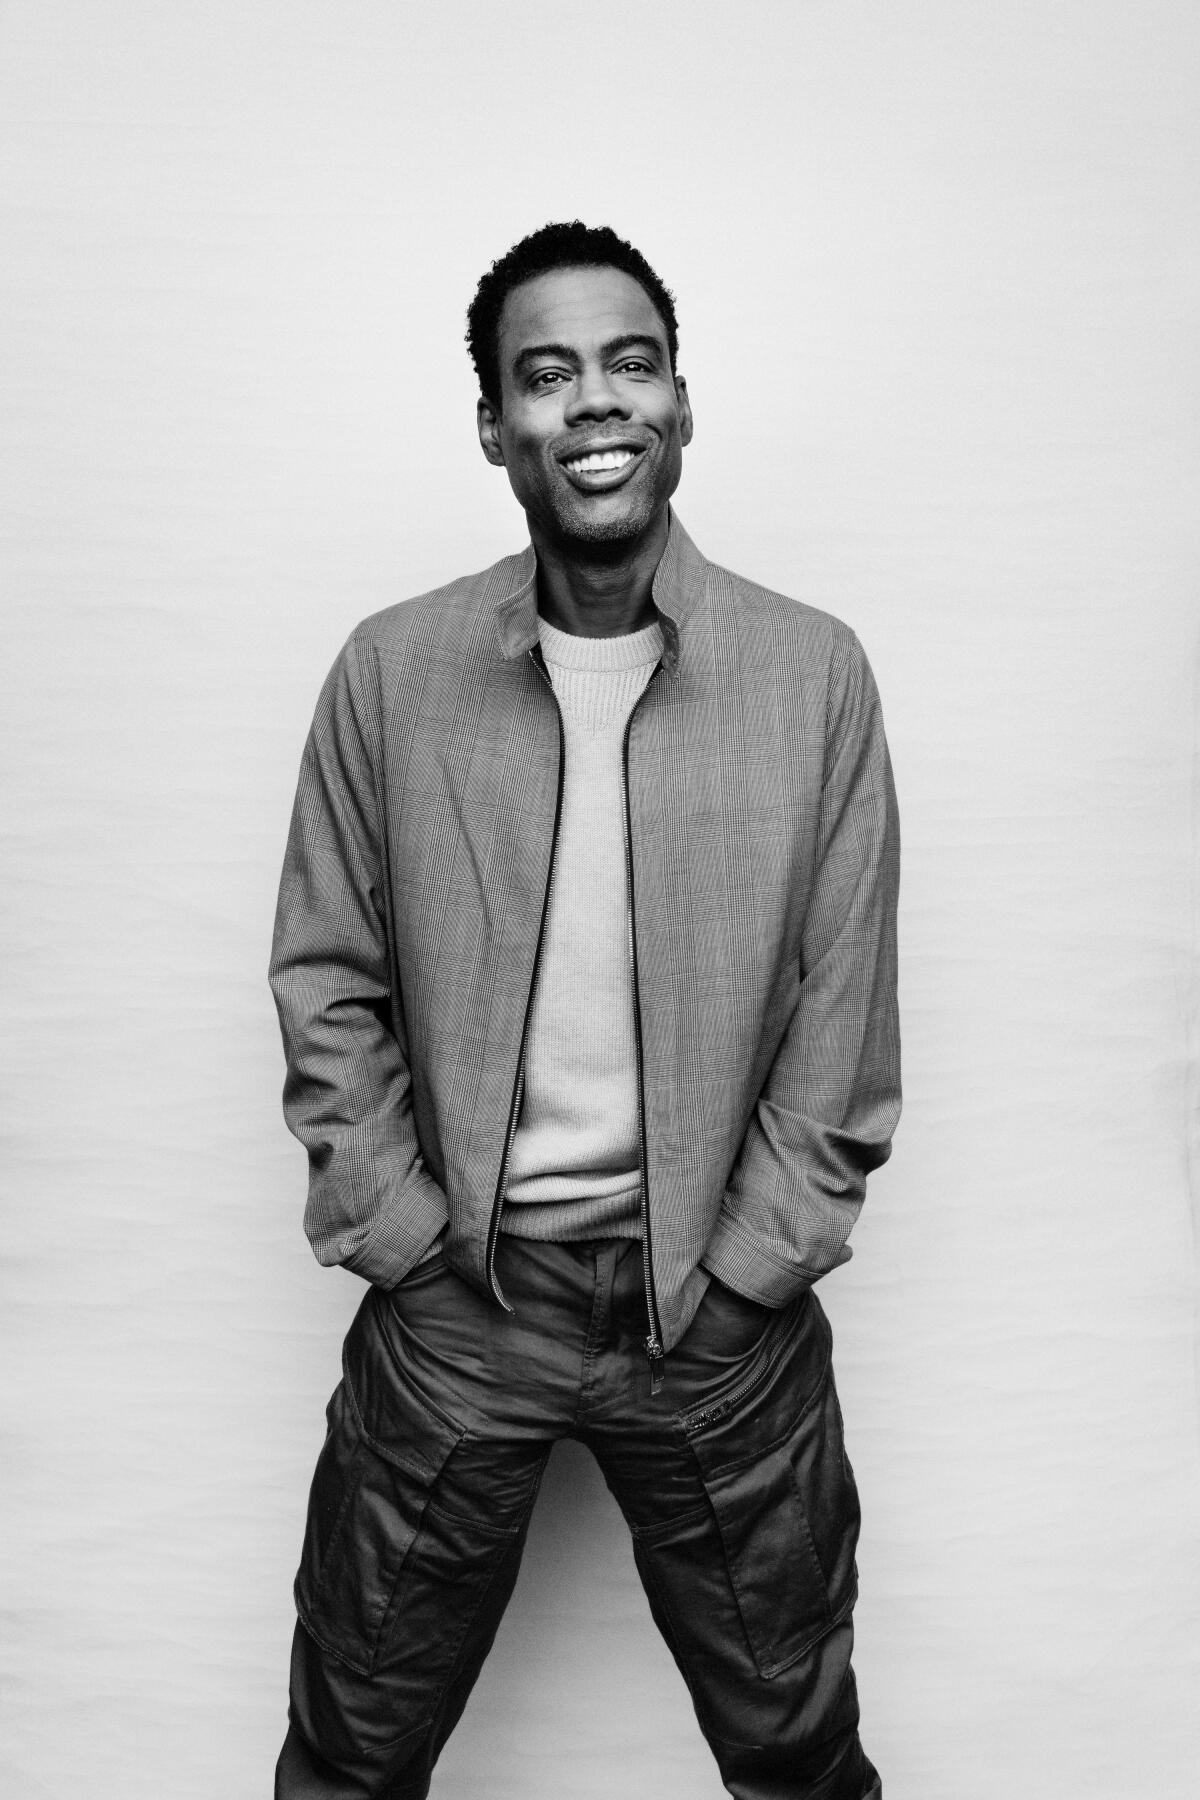 A black and white photo of Chris Rock, wearing a jacket, T-shirt and jeans and standing with his hands in his pockets.